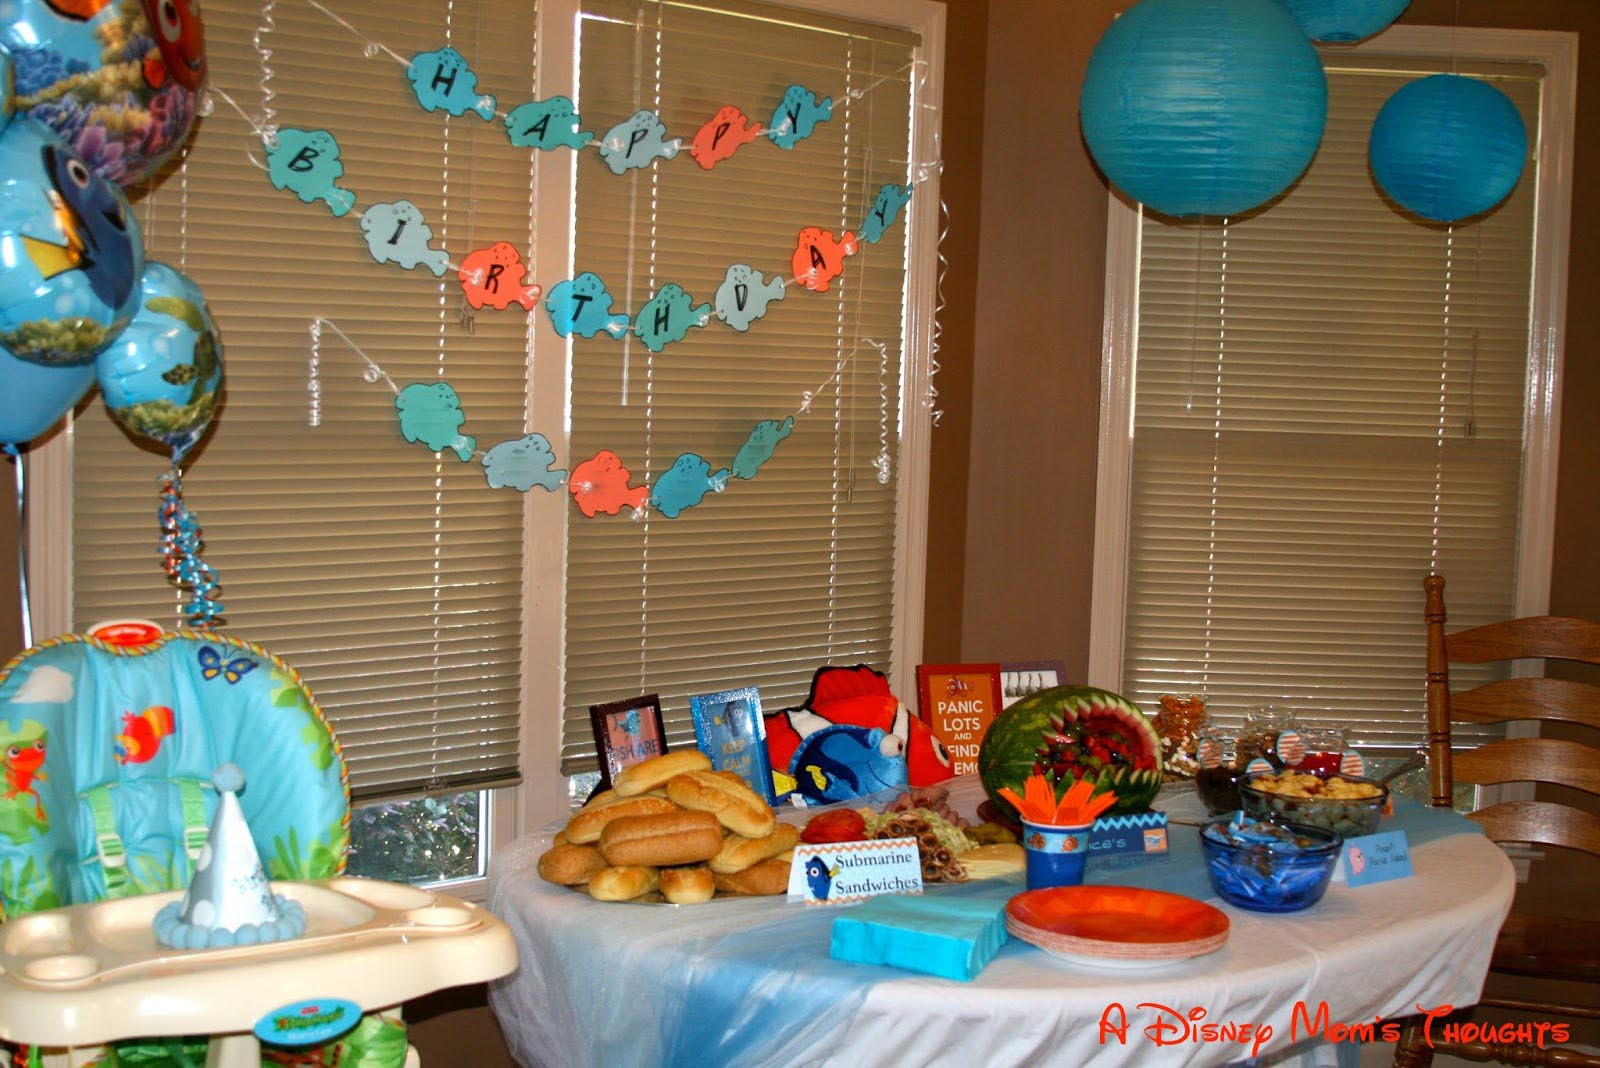 Finding Nemo Birthday Decorations
 Travel in the Ocean at a Nemo Birthday Party